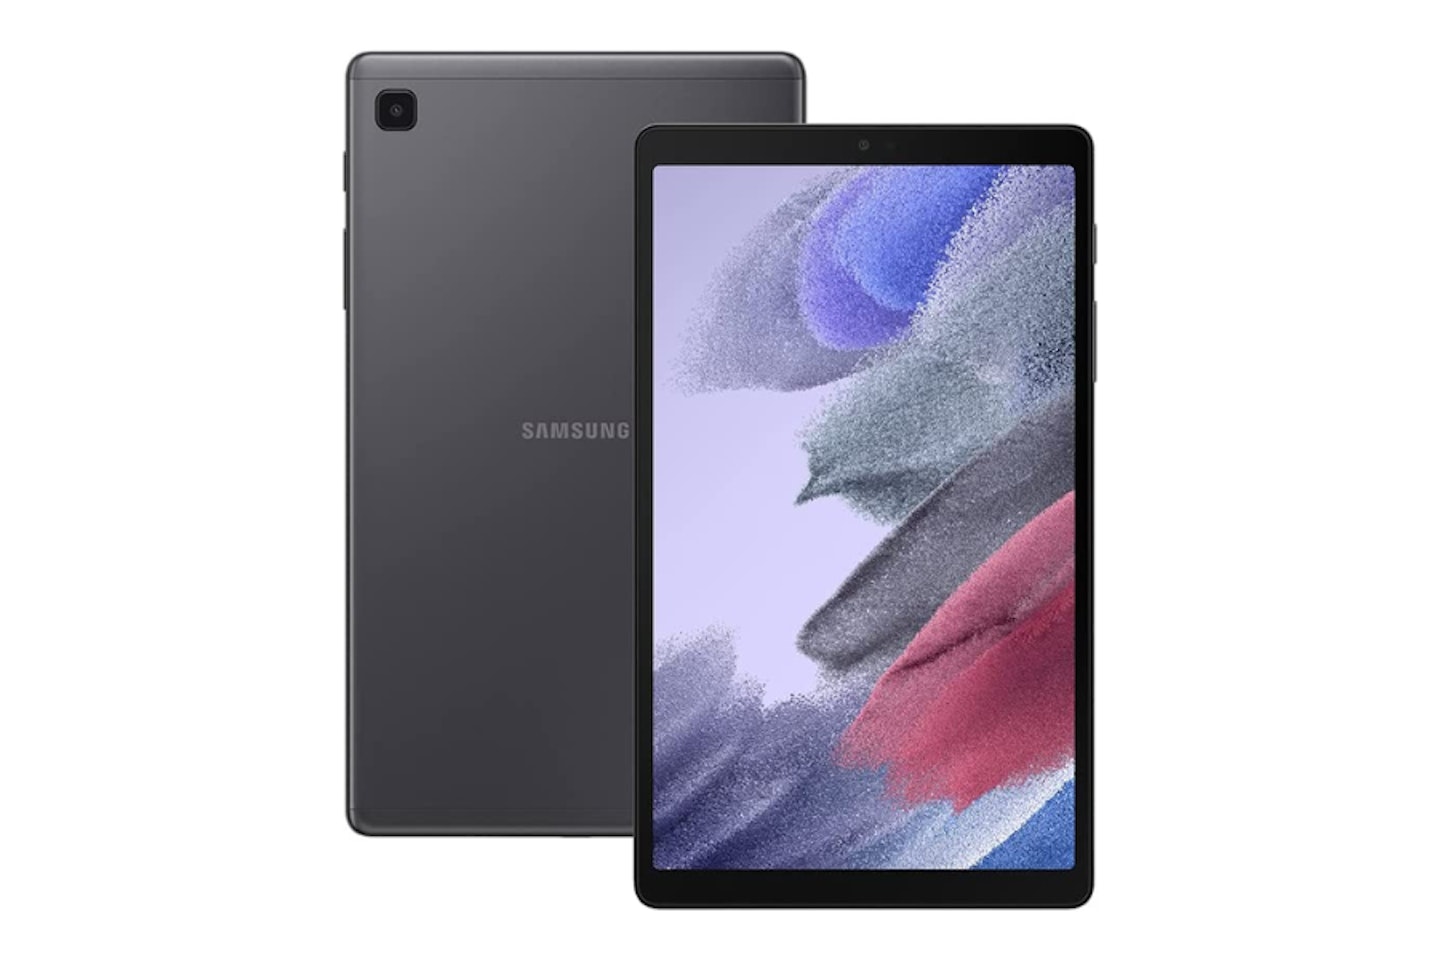 Samsung Galaxy Tab A7 Lite 8.7 Inch- one of the best mini tablets